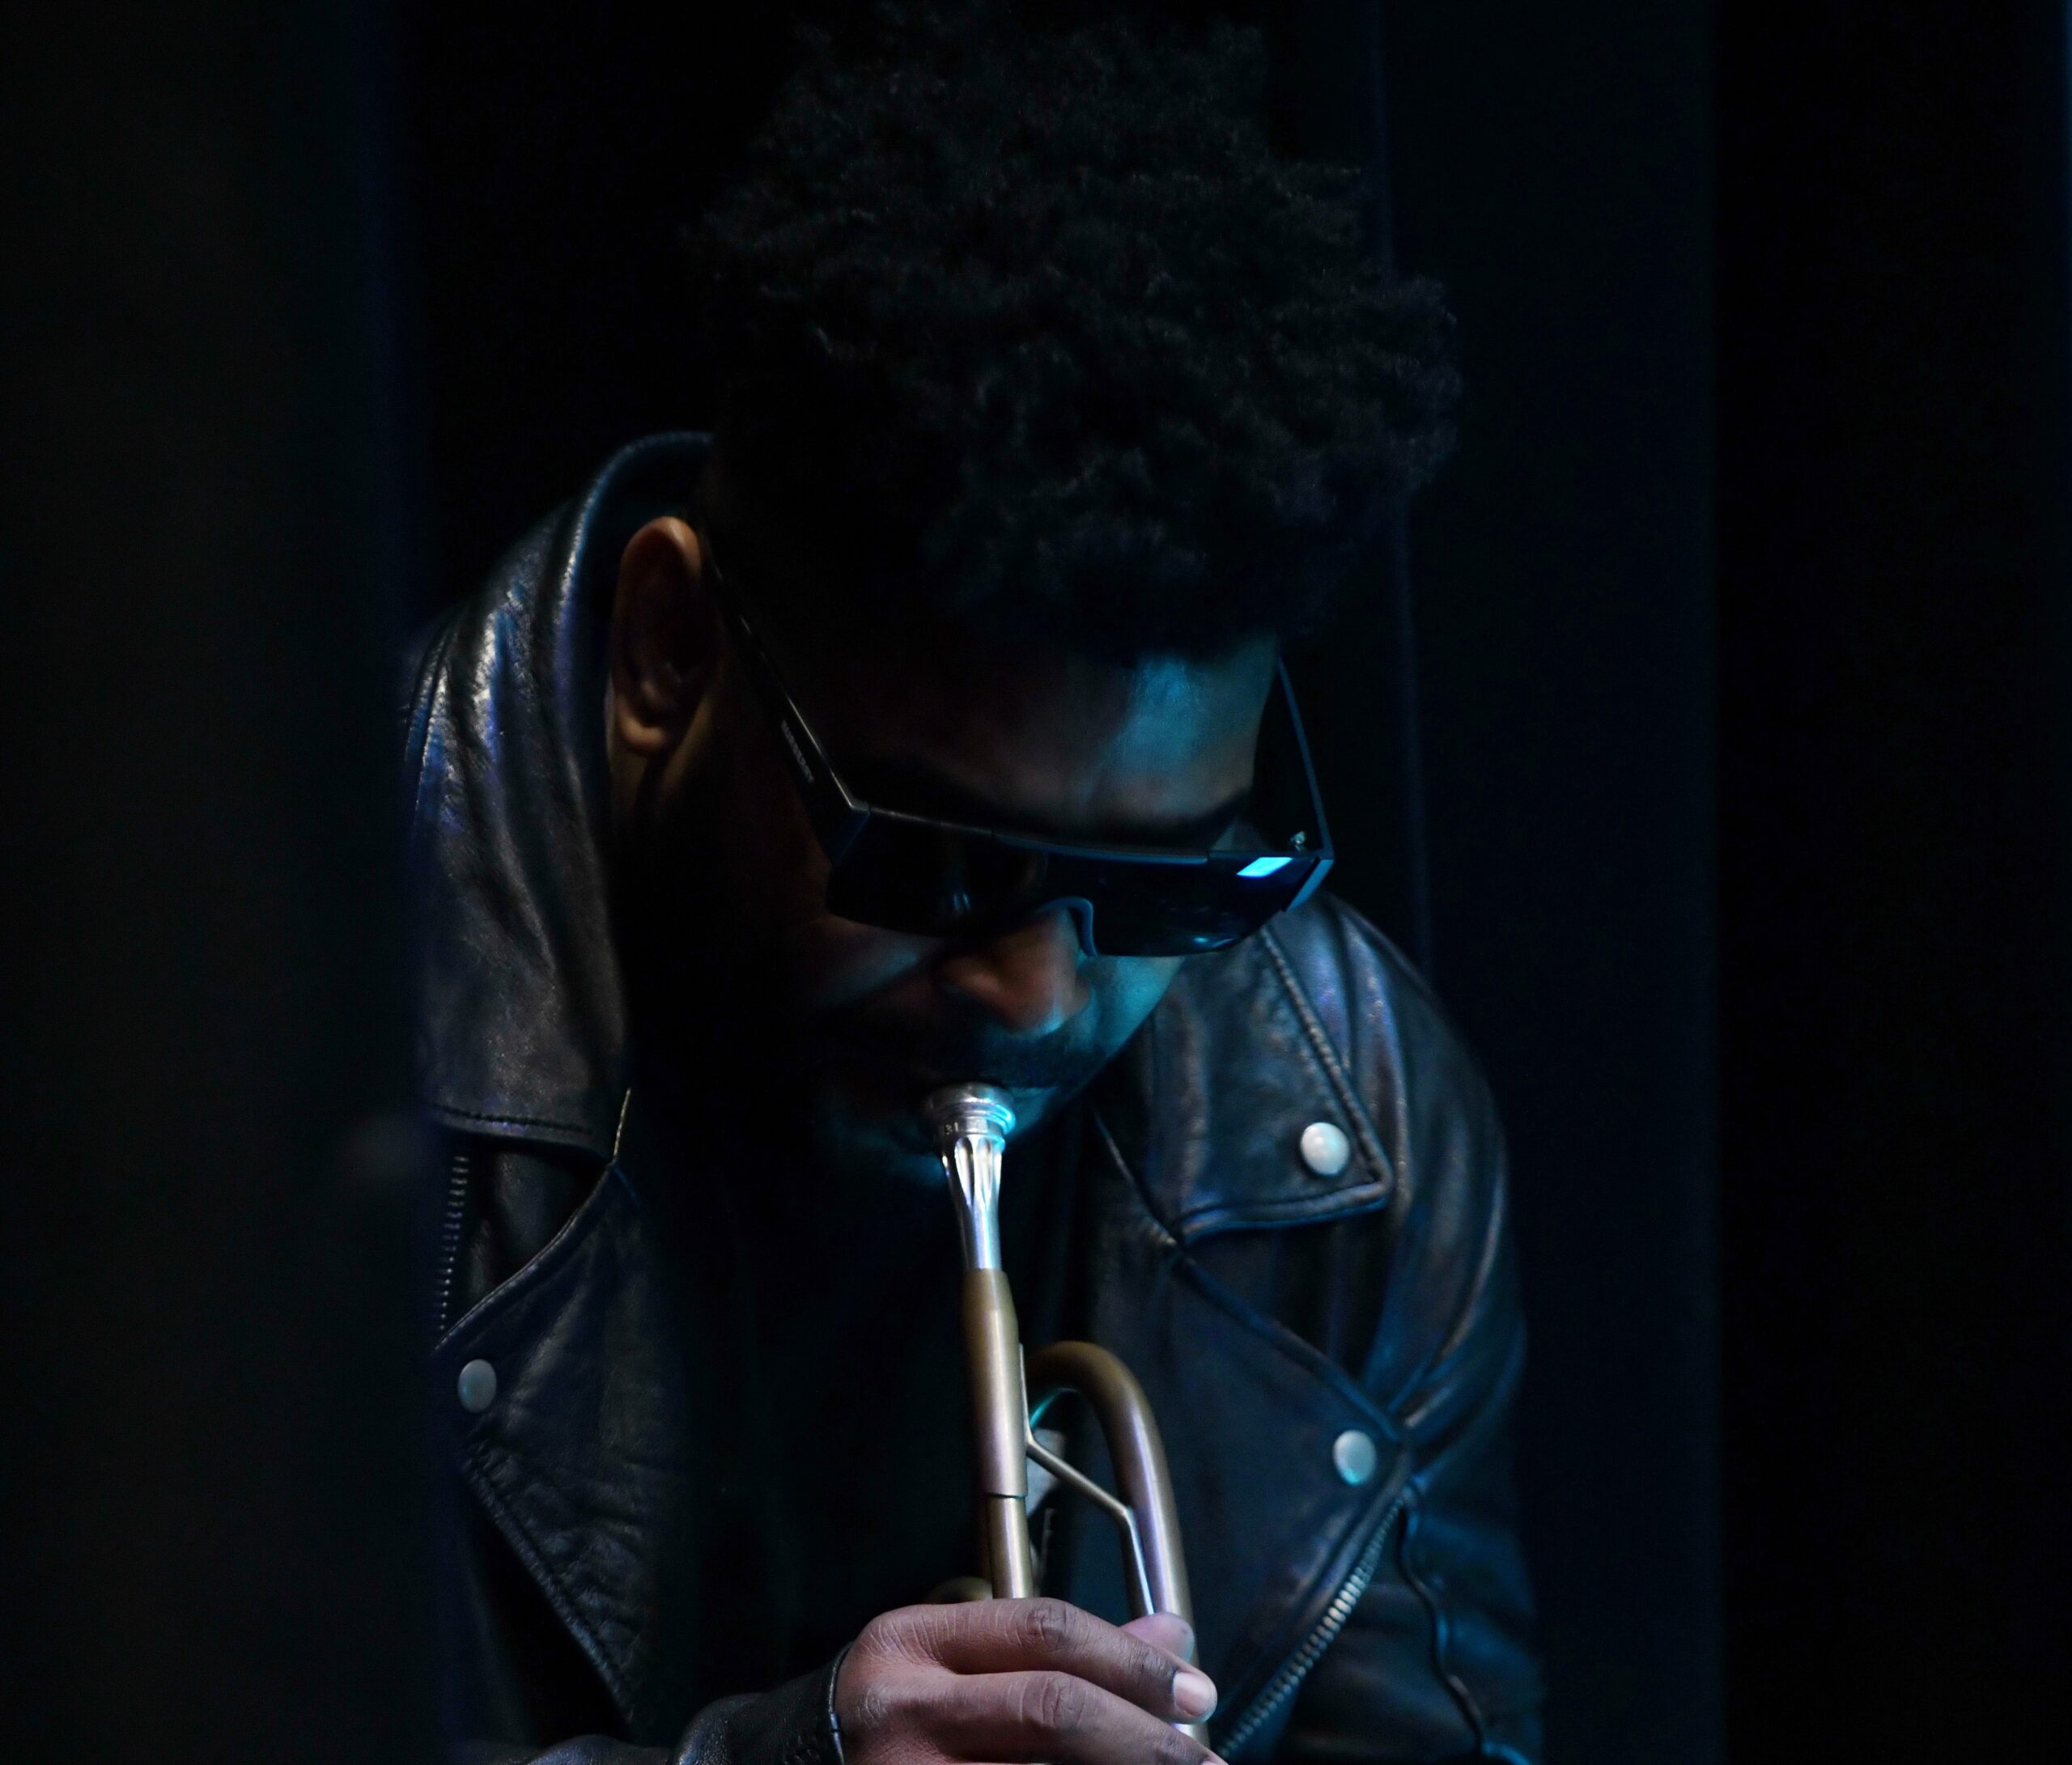 Portrait of Corey Wilkes wearing sunglasses, a black leather jacket, and playing a trumpet.